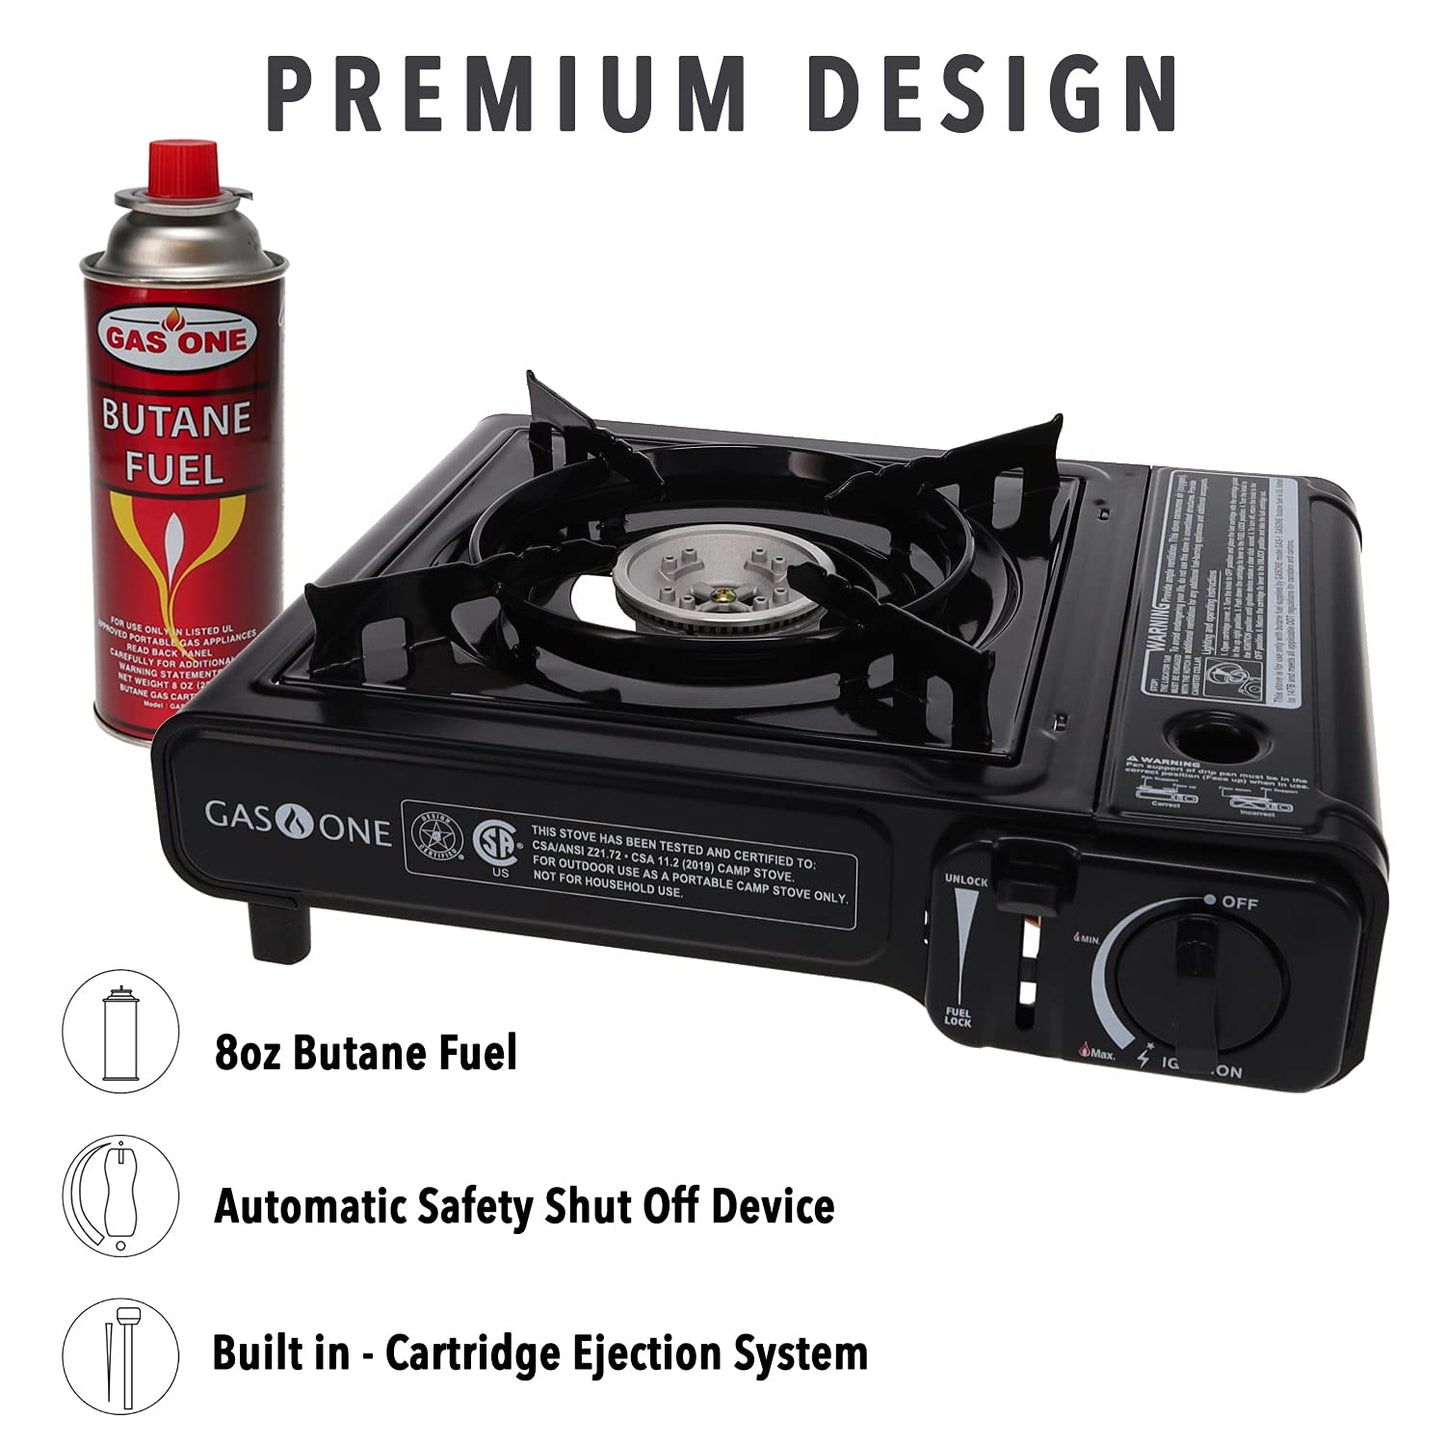 GAS ONE GS-3000 Portable Gas Stove with Carrying Case, 9,000 BTU, CSA Approved, Black, 11.2" H x 4.4" W x 13.5" L